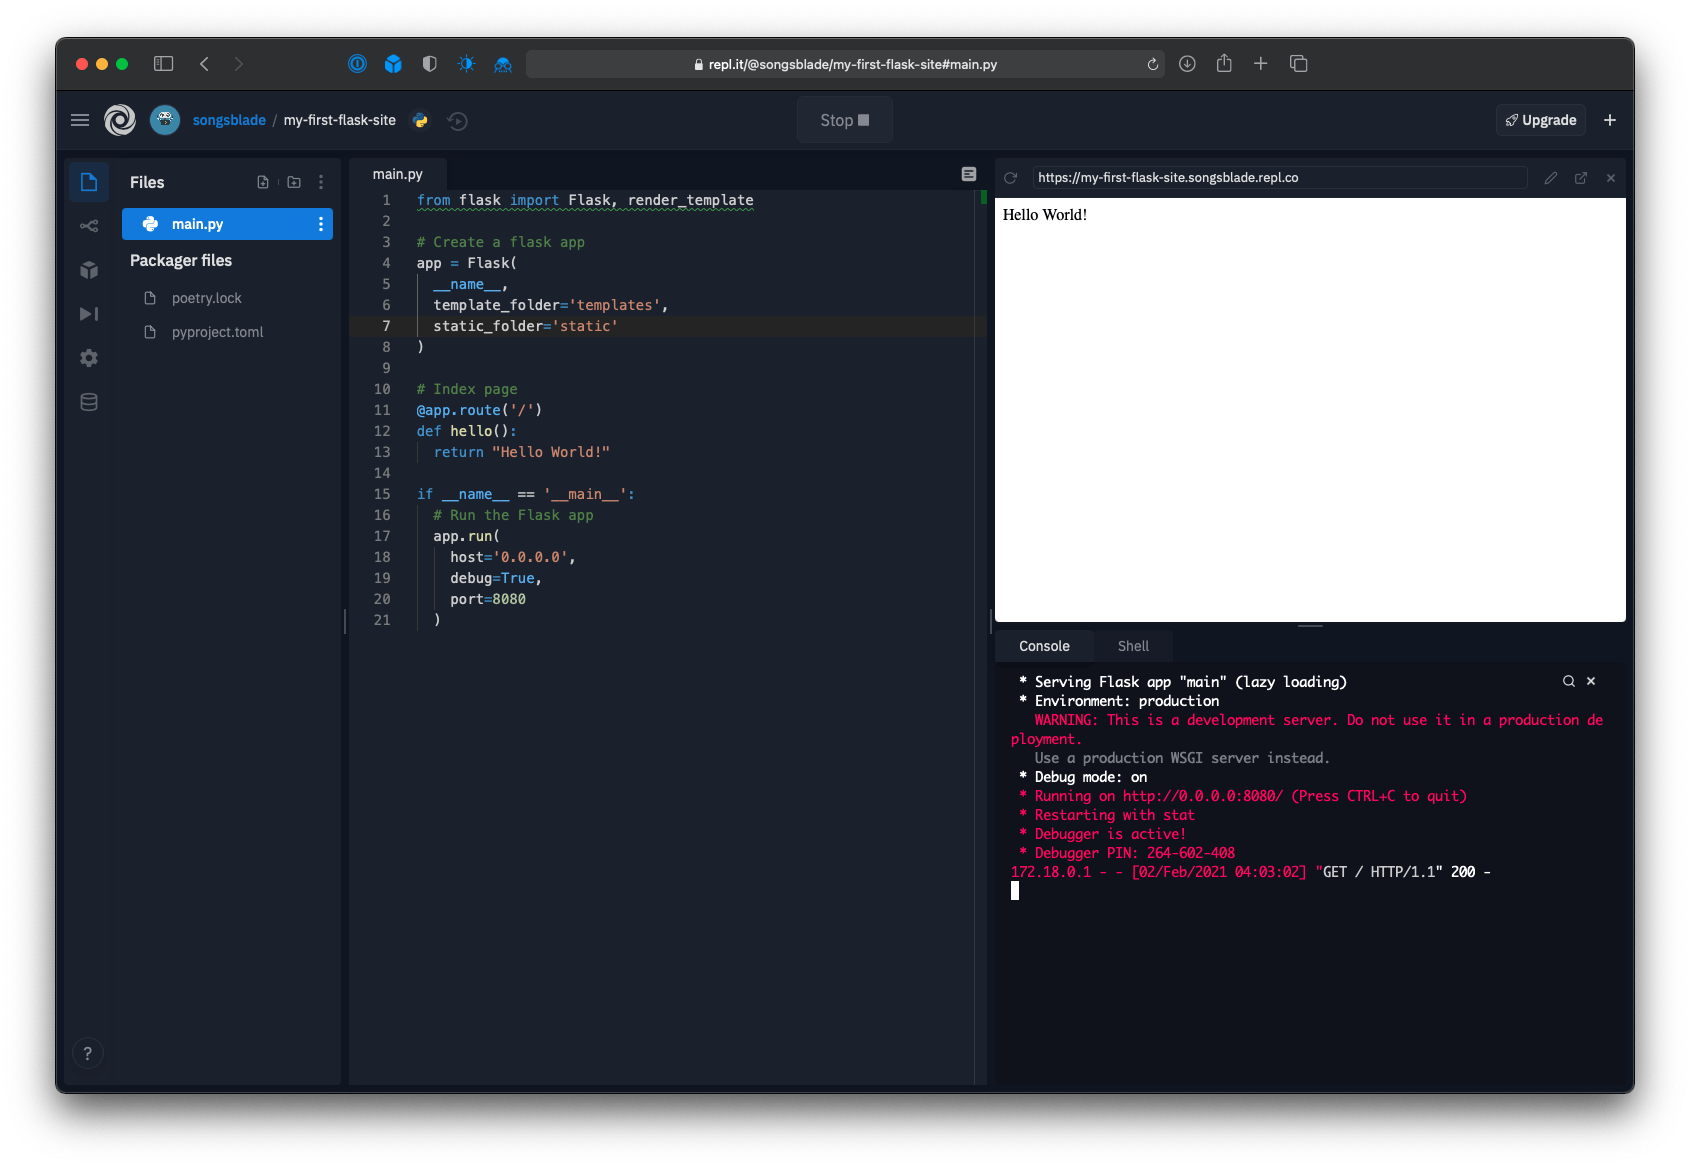 Repl editor showing the Flask app running